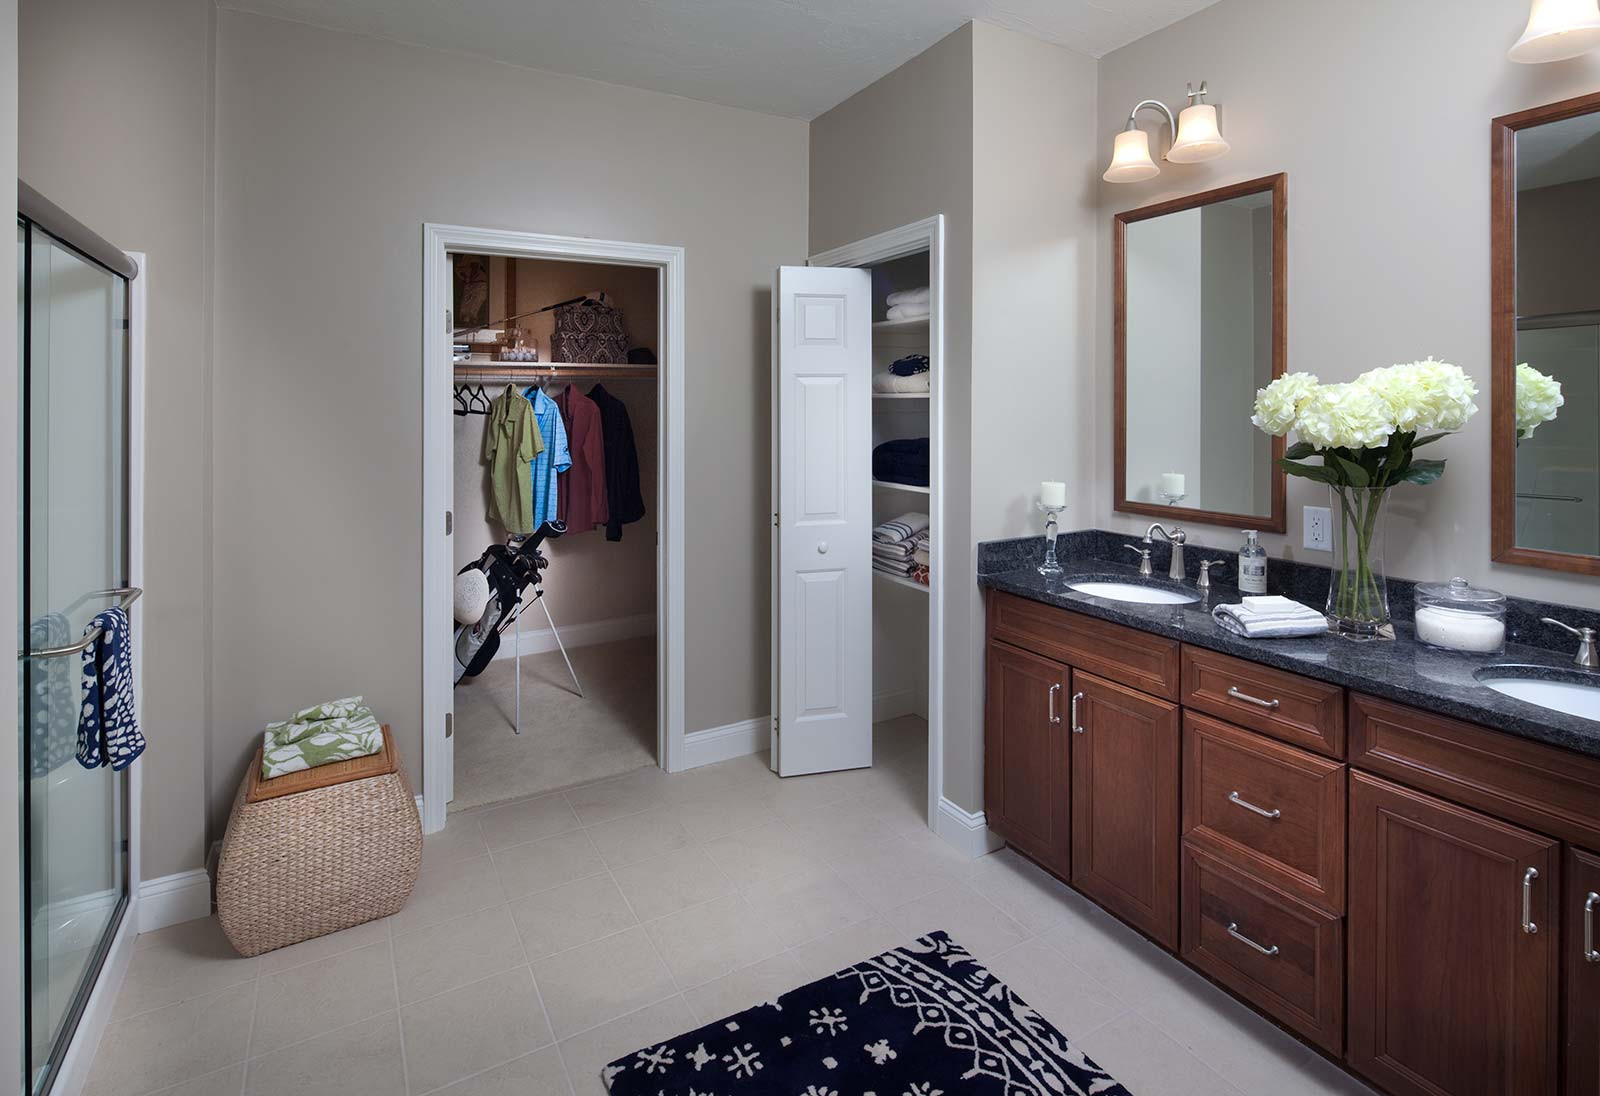 Master Bathroom With Closet
 Double sinks a walk in closet linen closet and large